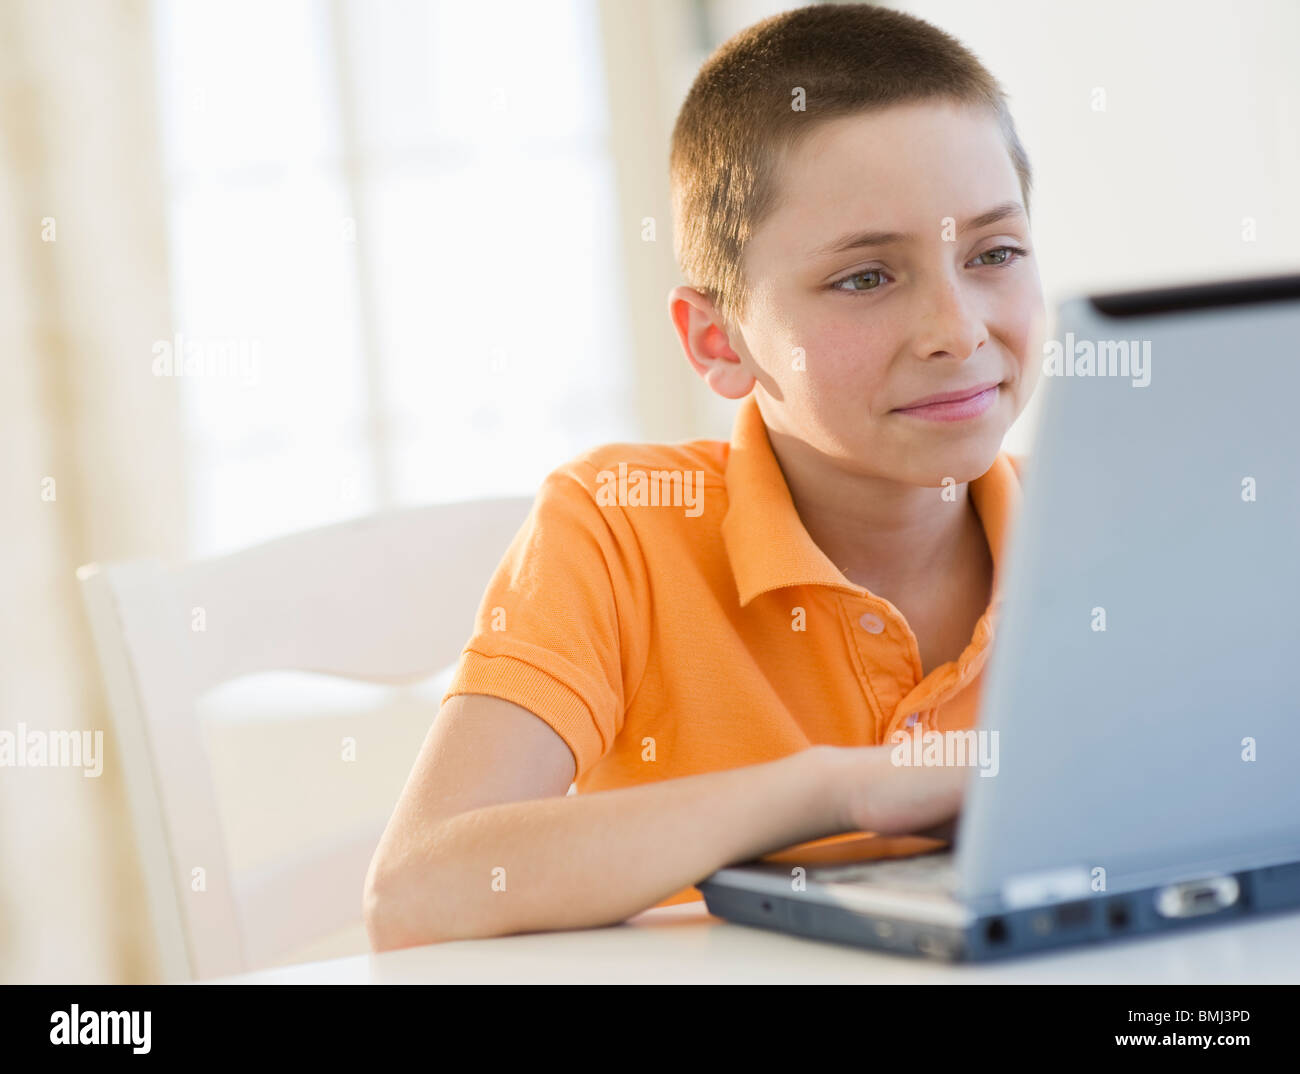 Young boy working on laptop Stock Photo